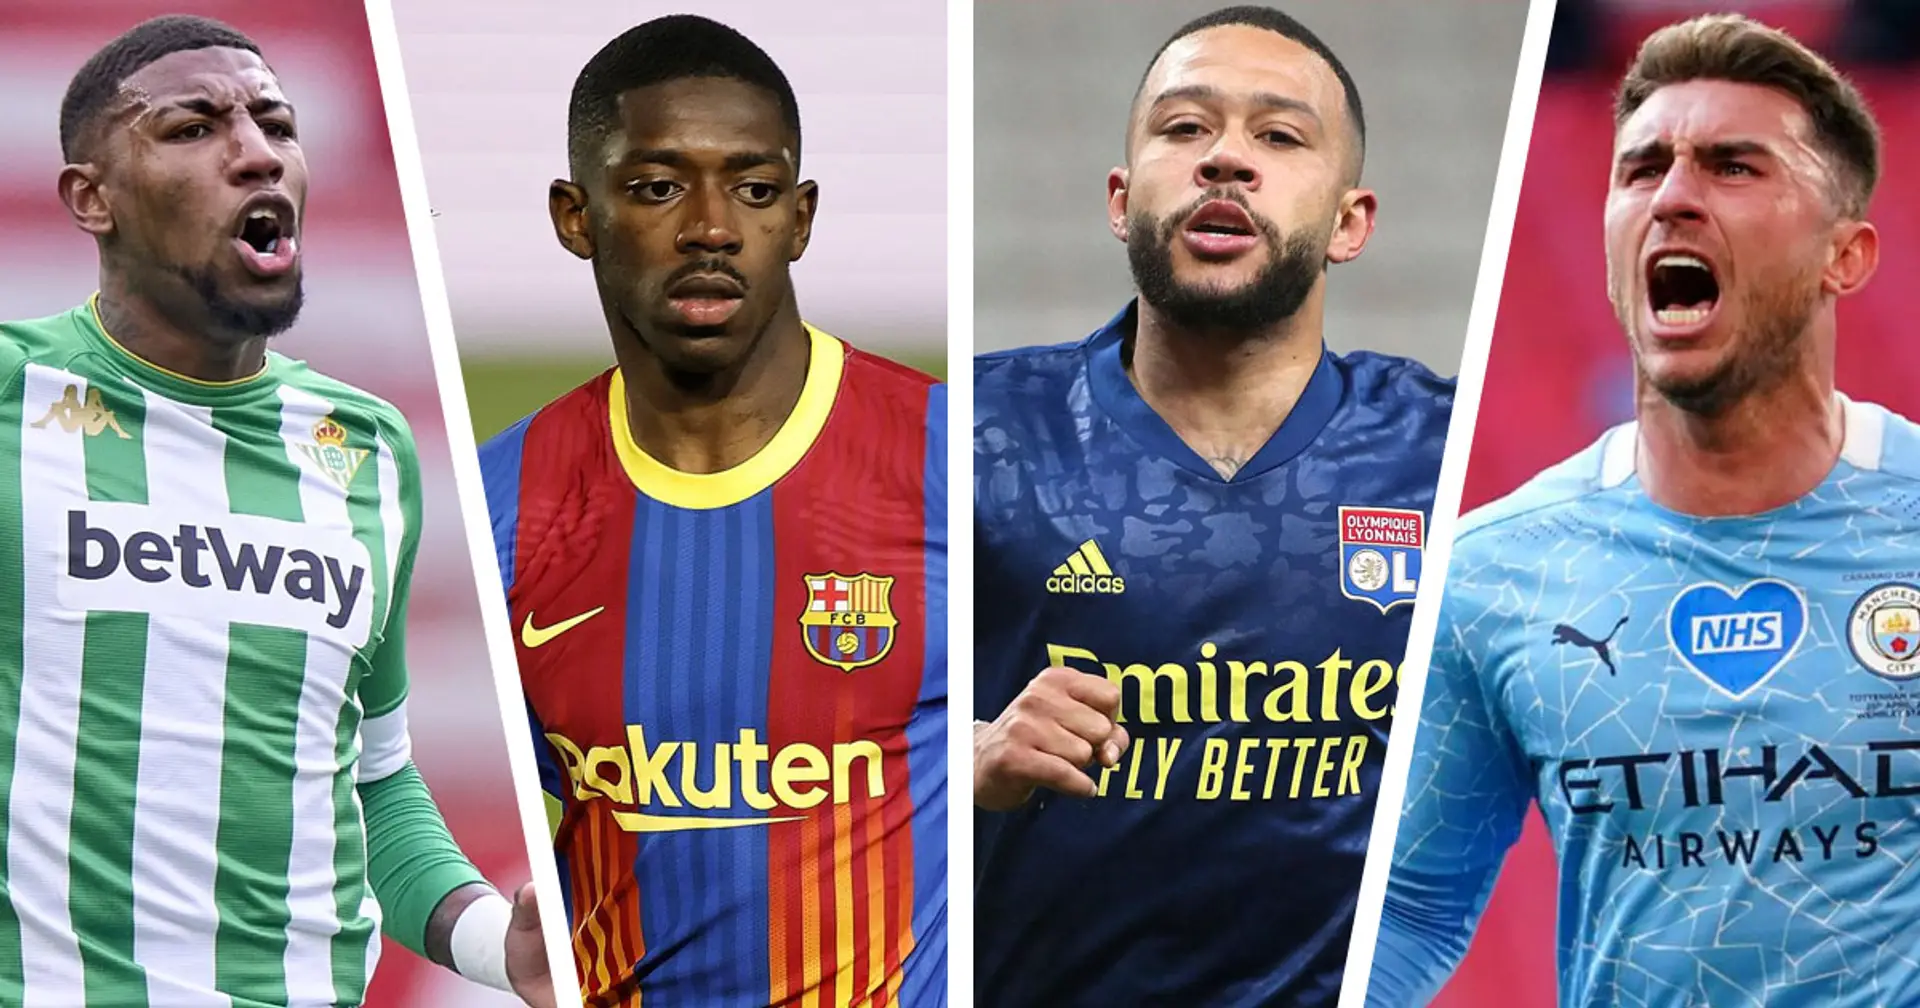 Depay in, Dembele out: 18-name transfer round-up at Barca with probability ratings